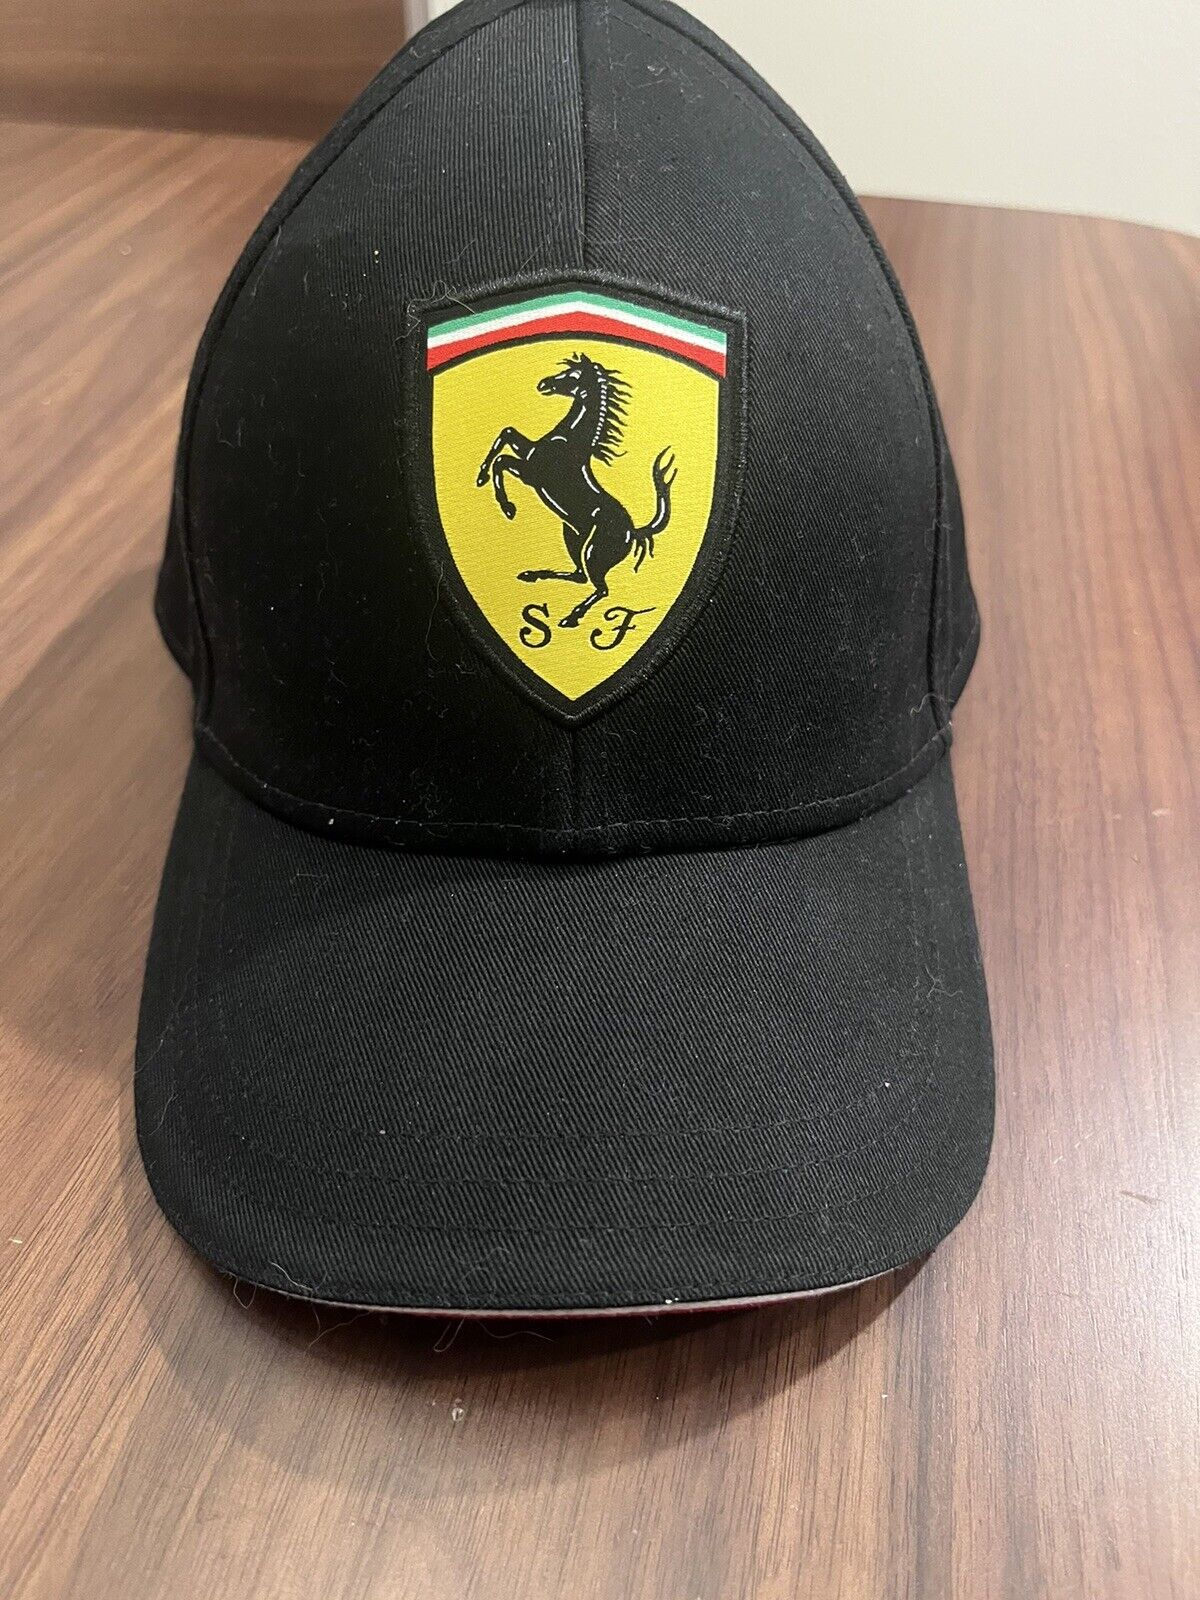 Ferrari Official Ball Cap Fits Up To Size 7